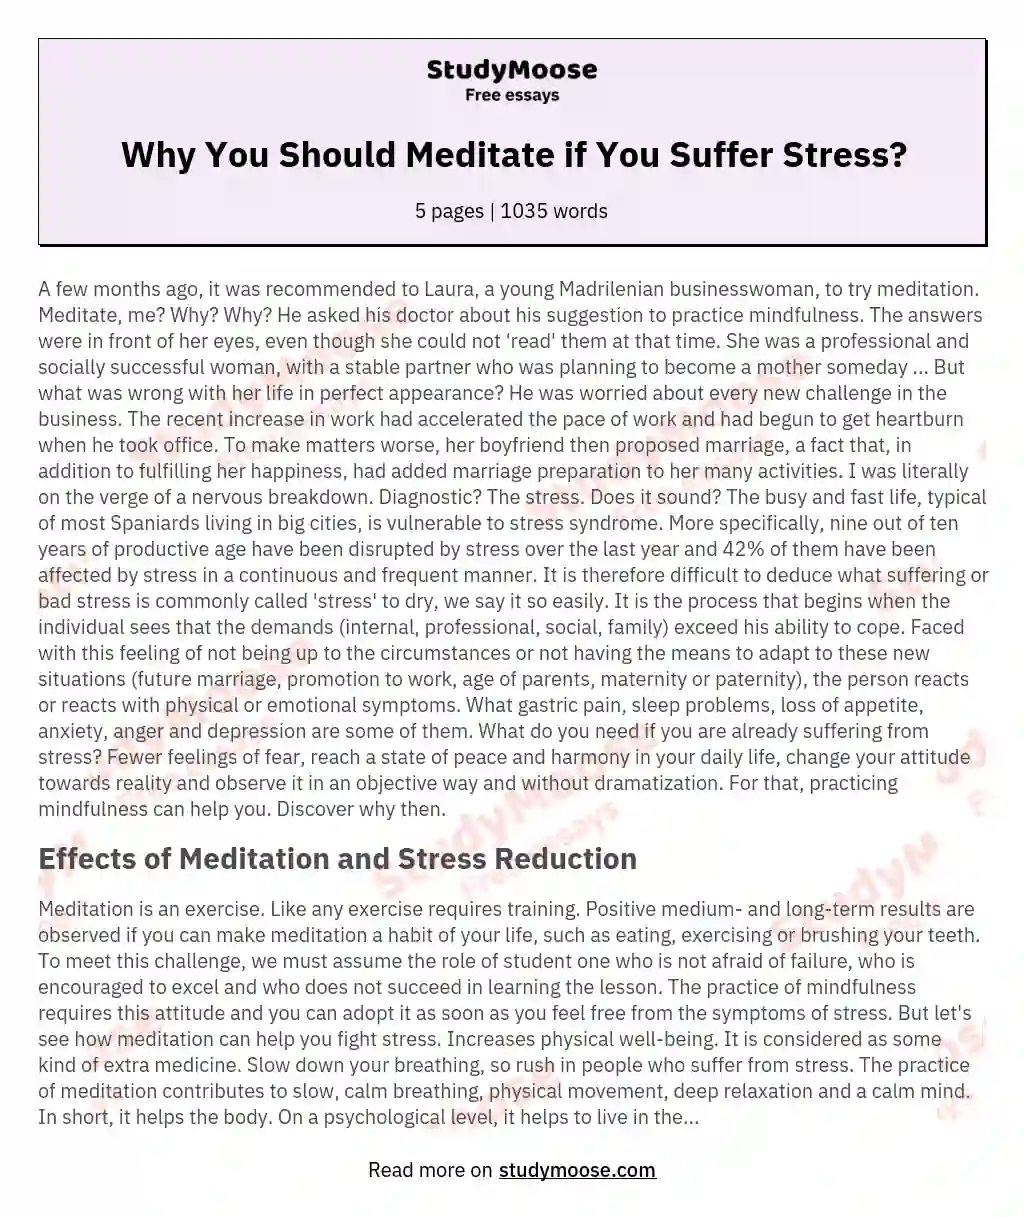 Why You Should Meditate if You Suffer Stress? essay